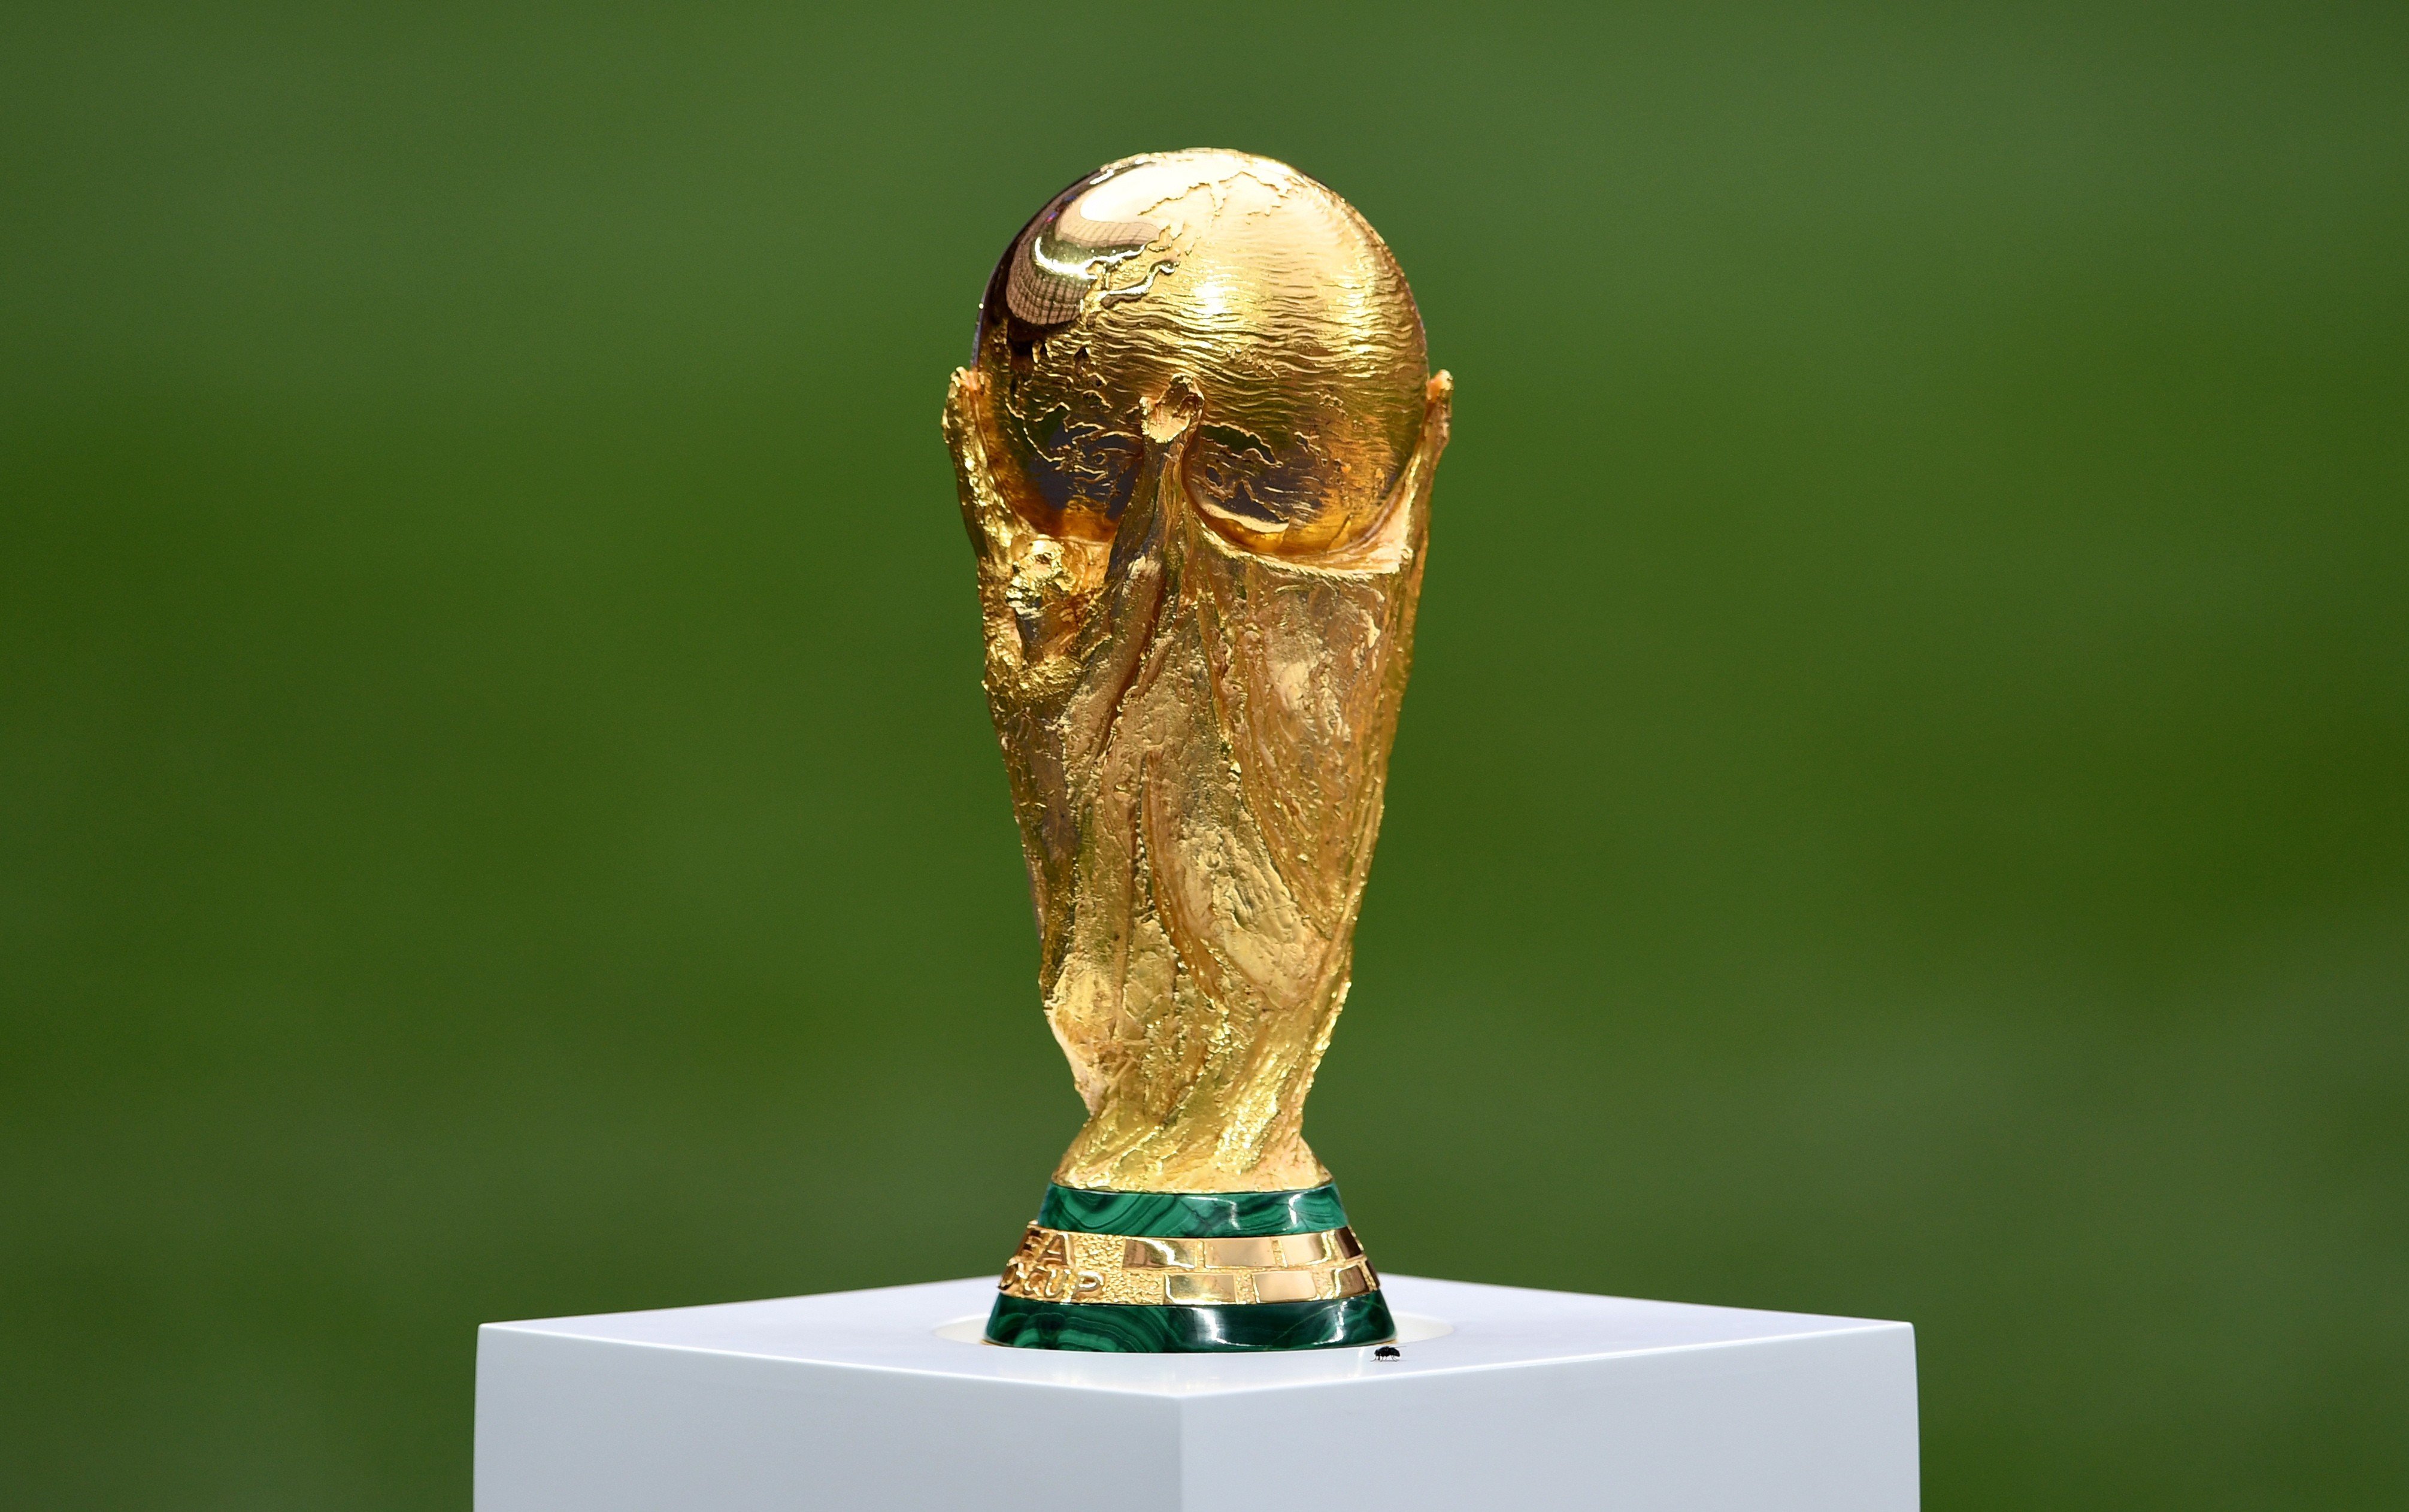 Can Southeast Asia launch a successful joint bid to host the World Cup in 2034? Photo: EPA-EFE